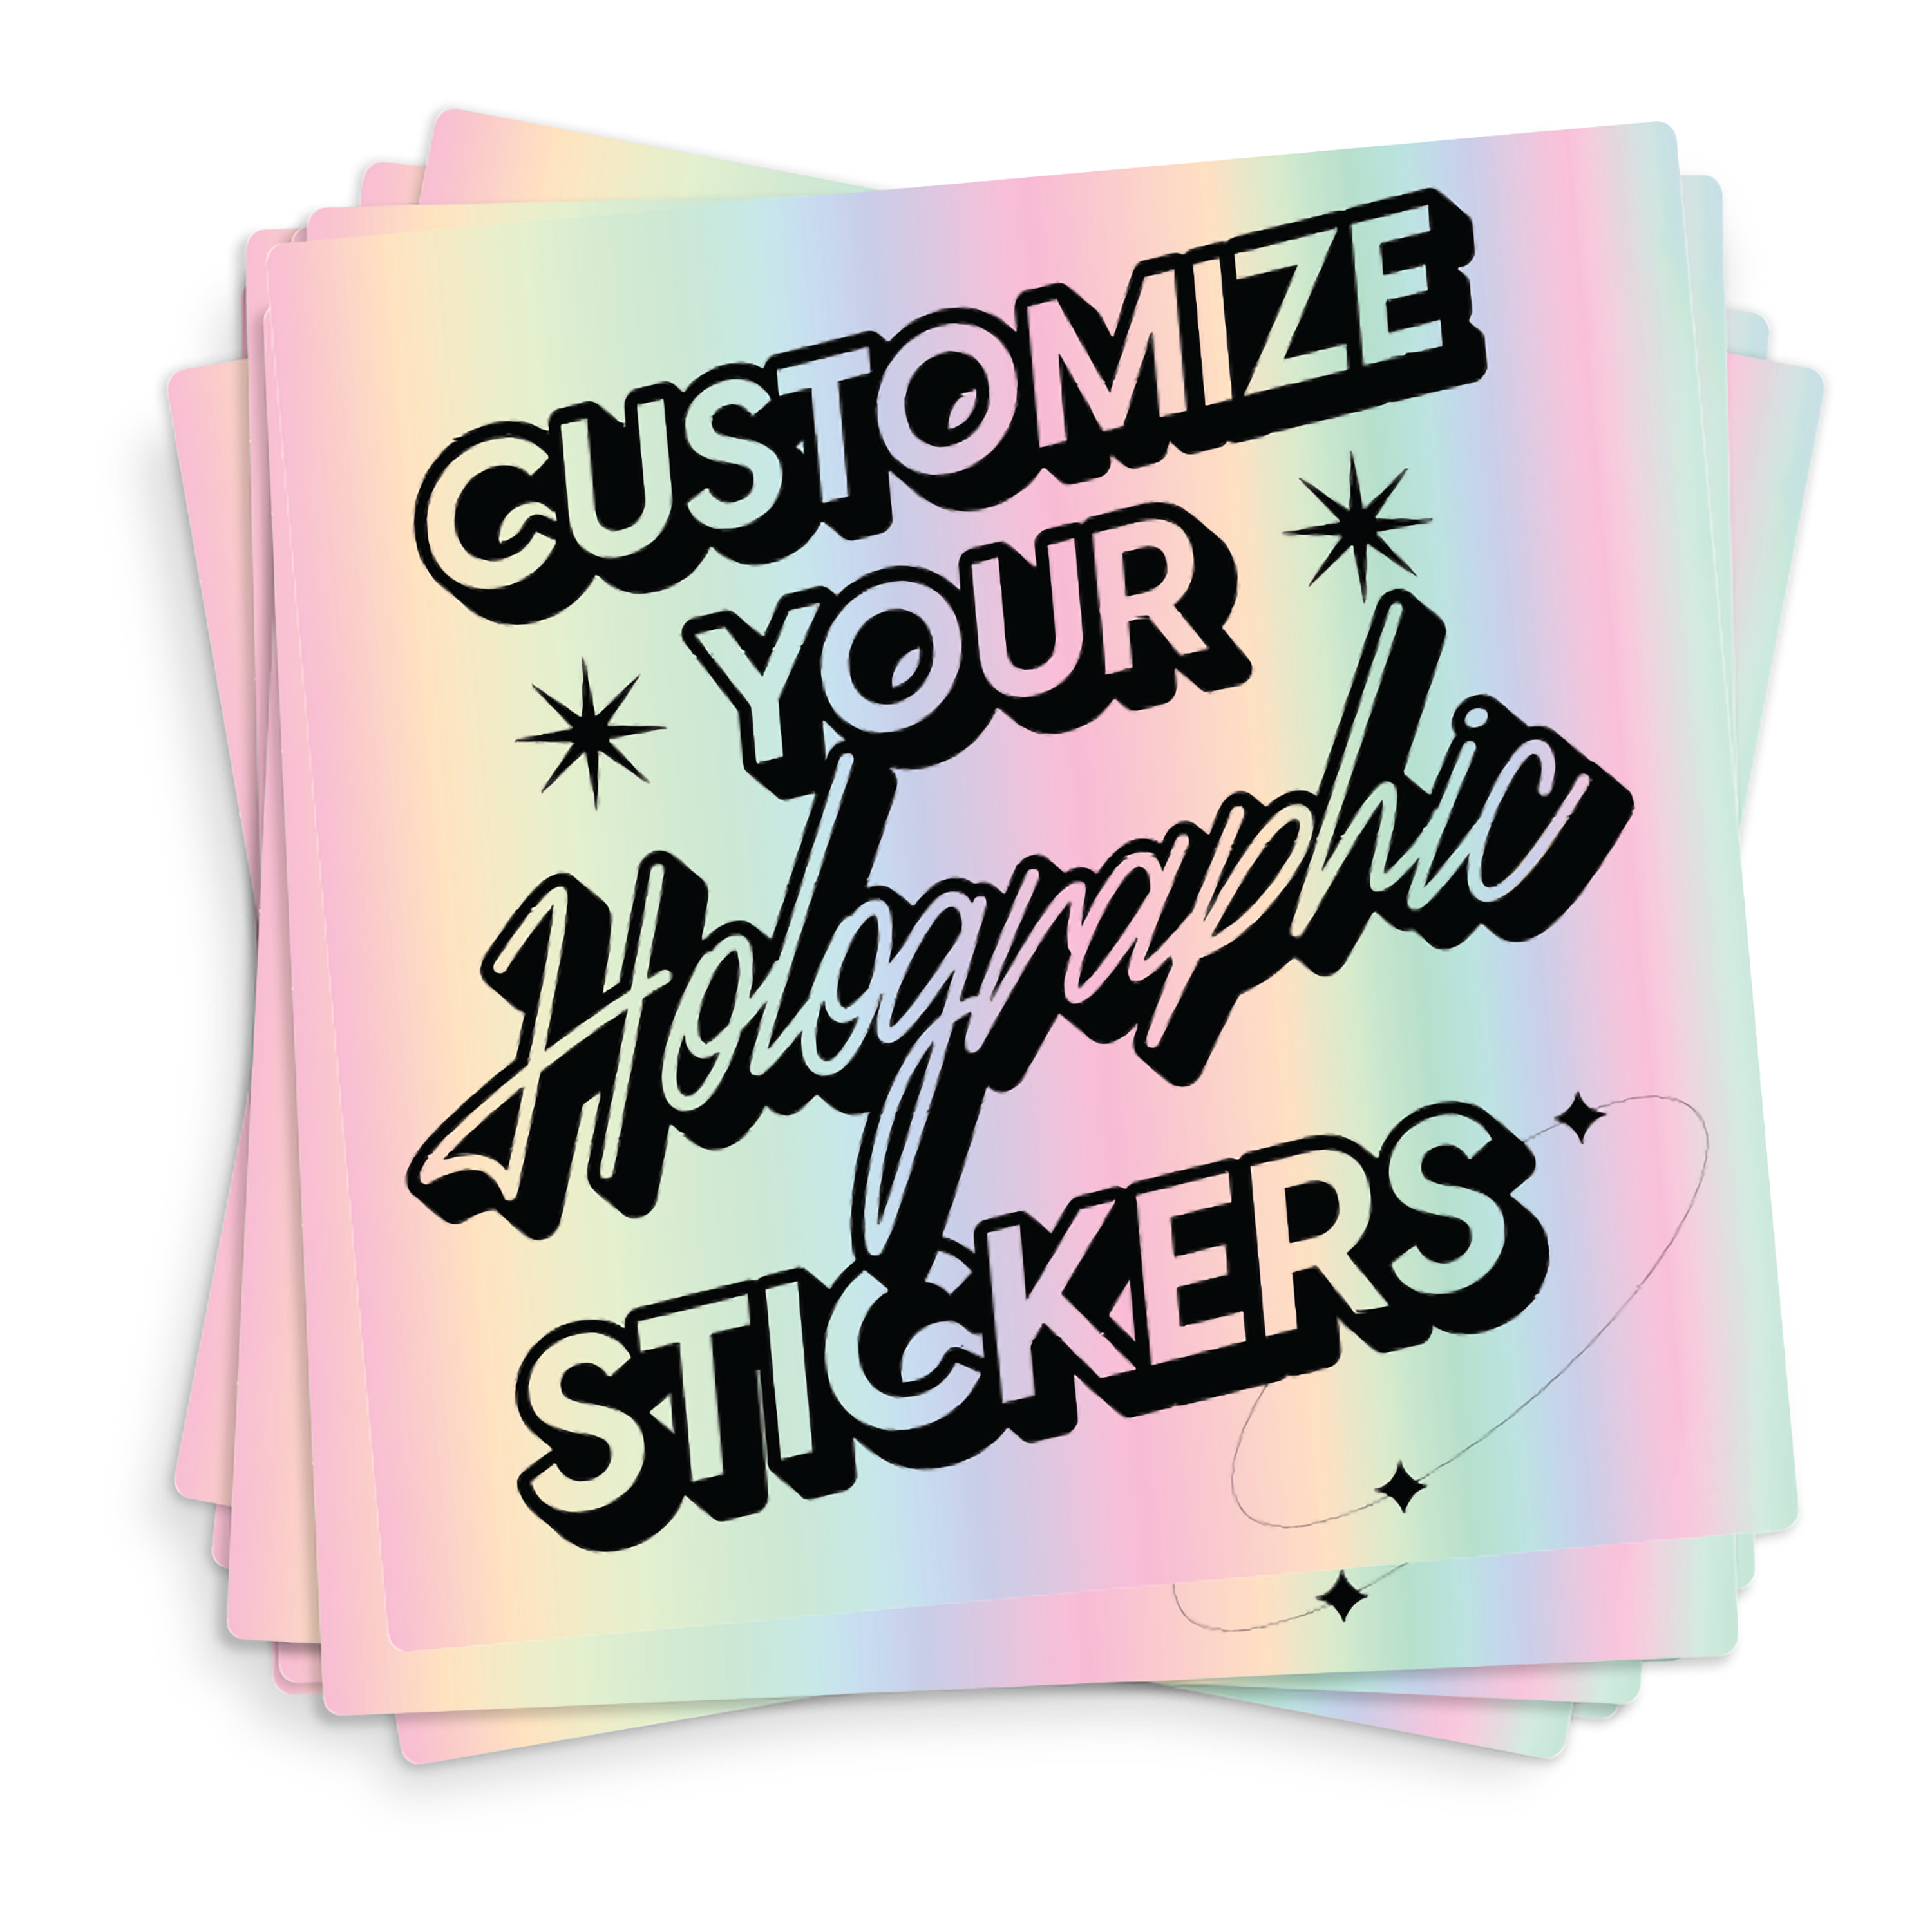 Custom Square Holographic Stickers on a Stack